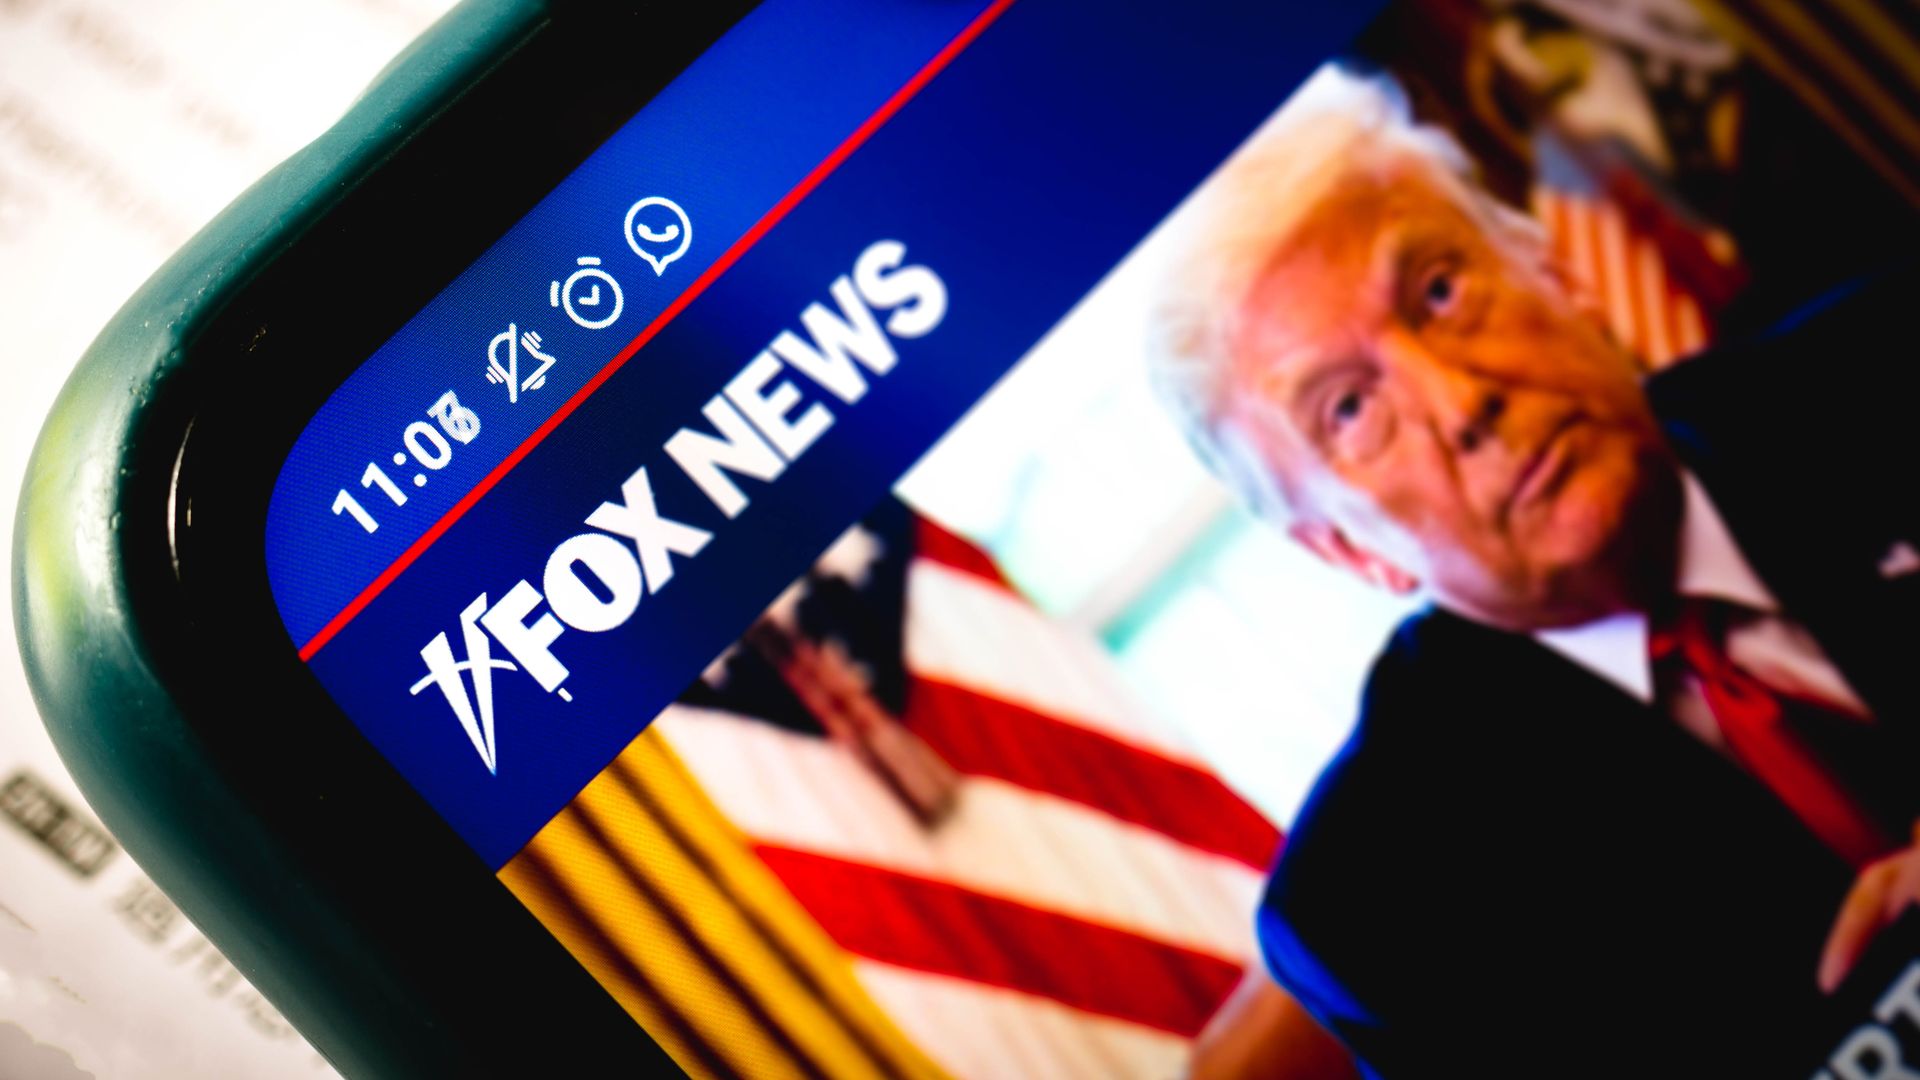 Photo of a phone screen showing Fox News' website and Donald Trump's picture